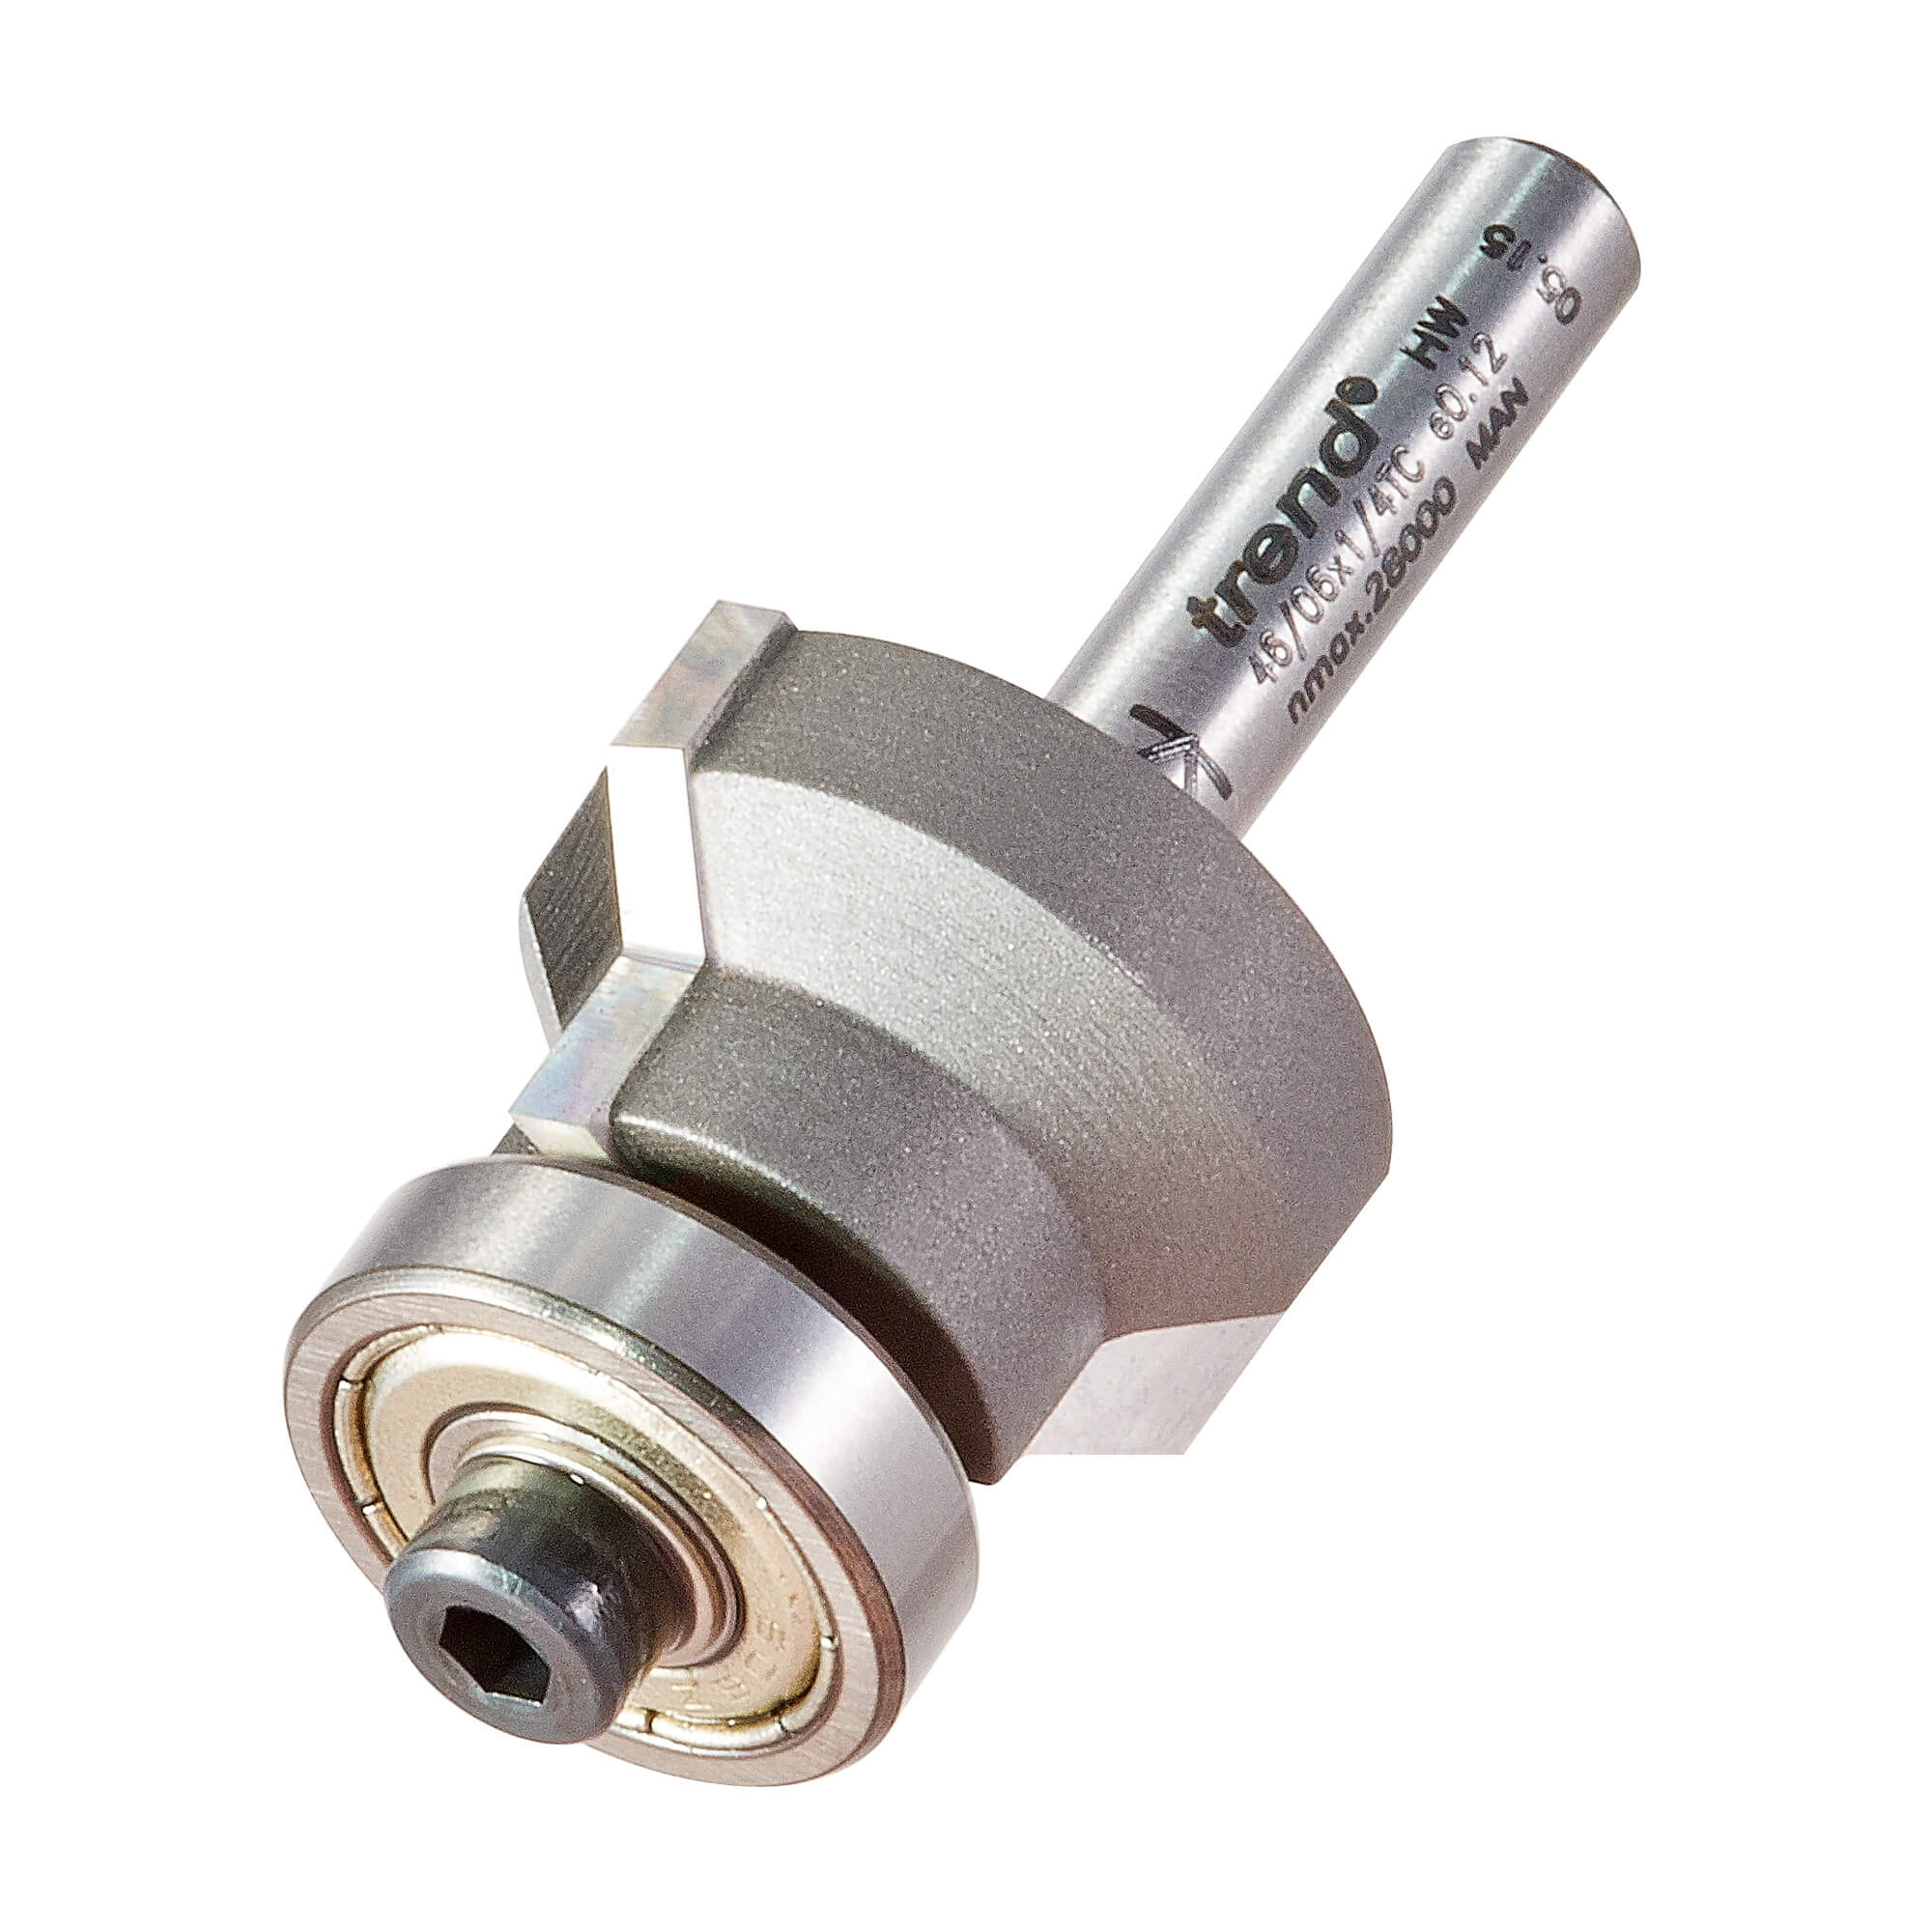 Image of Trend Combi Trimmer Bearing Guided Router Cutter 24mm 6mm 1/4"